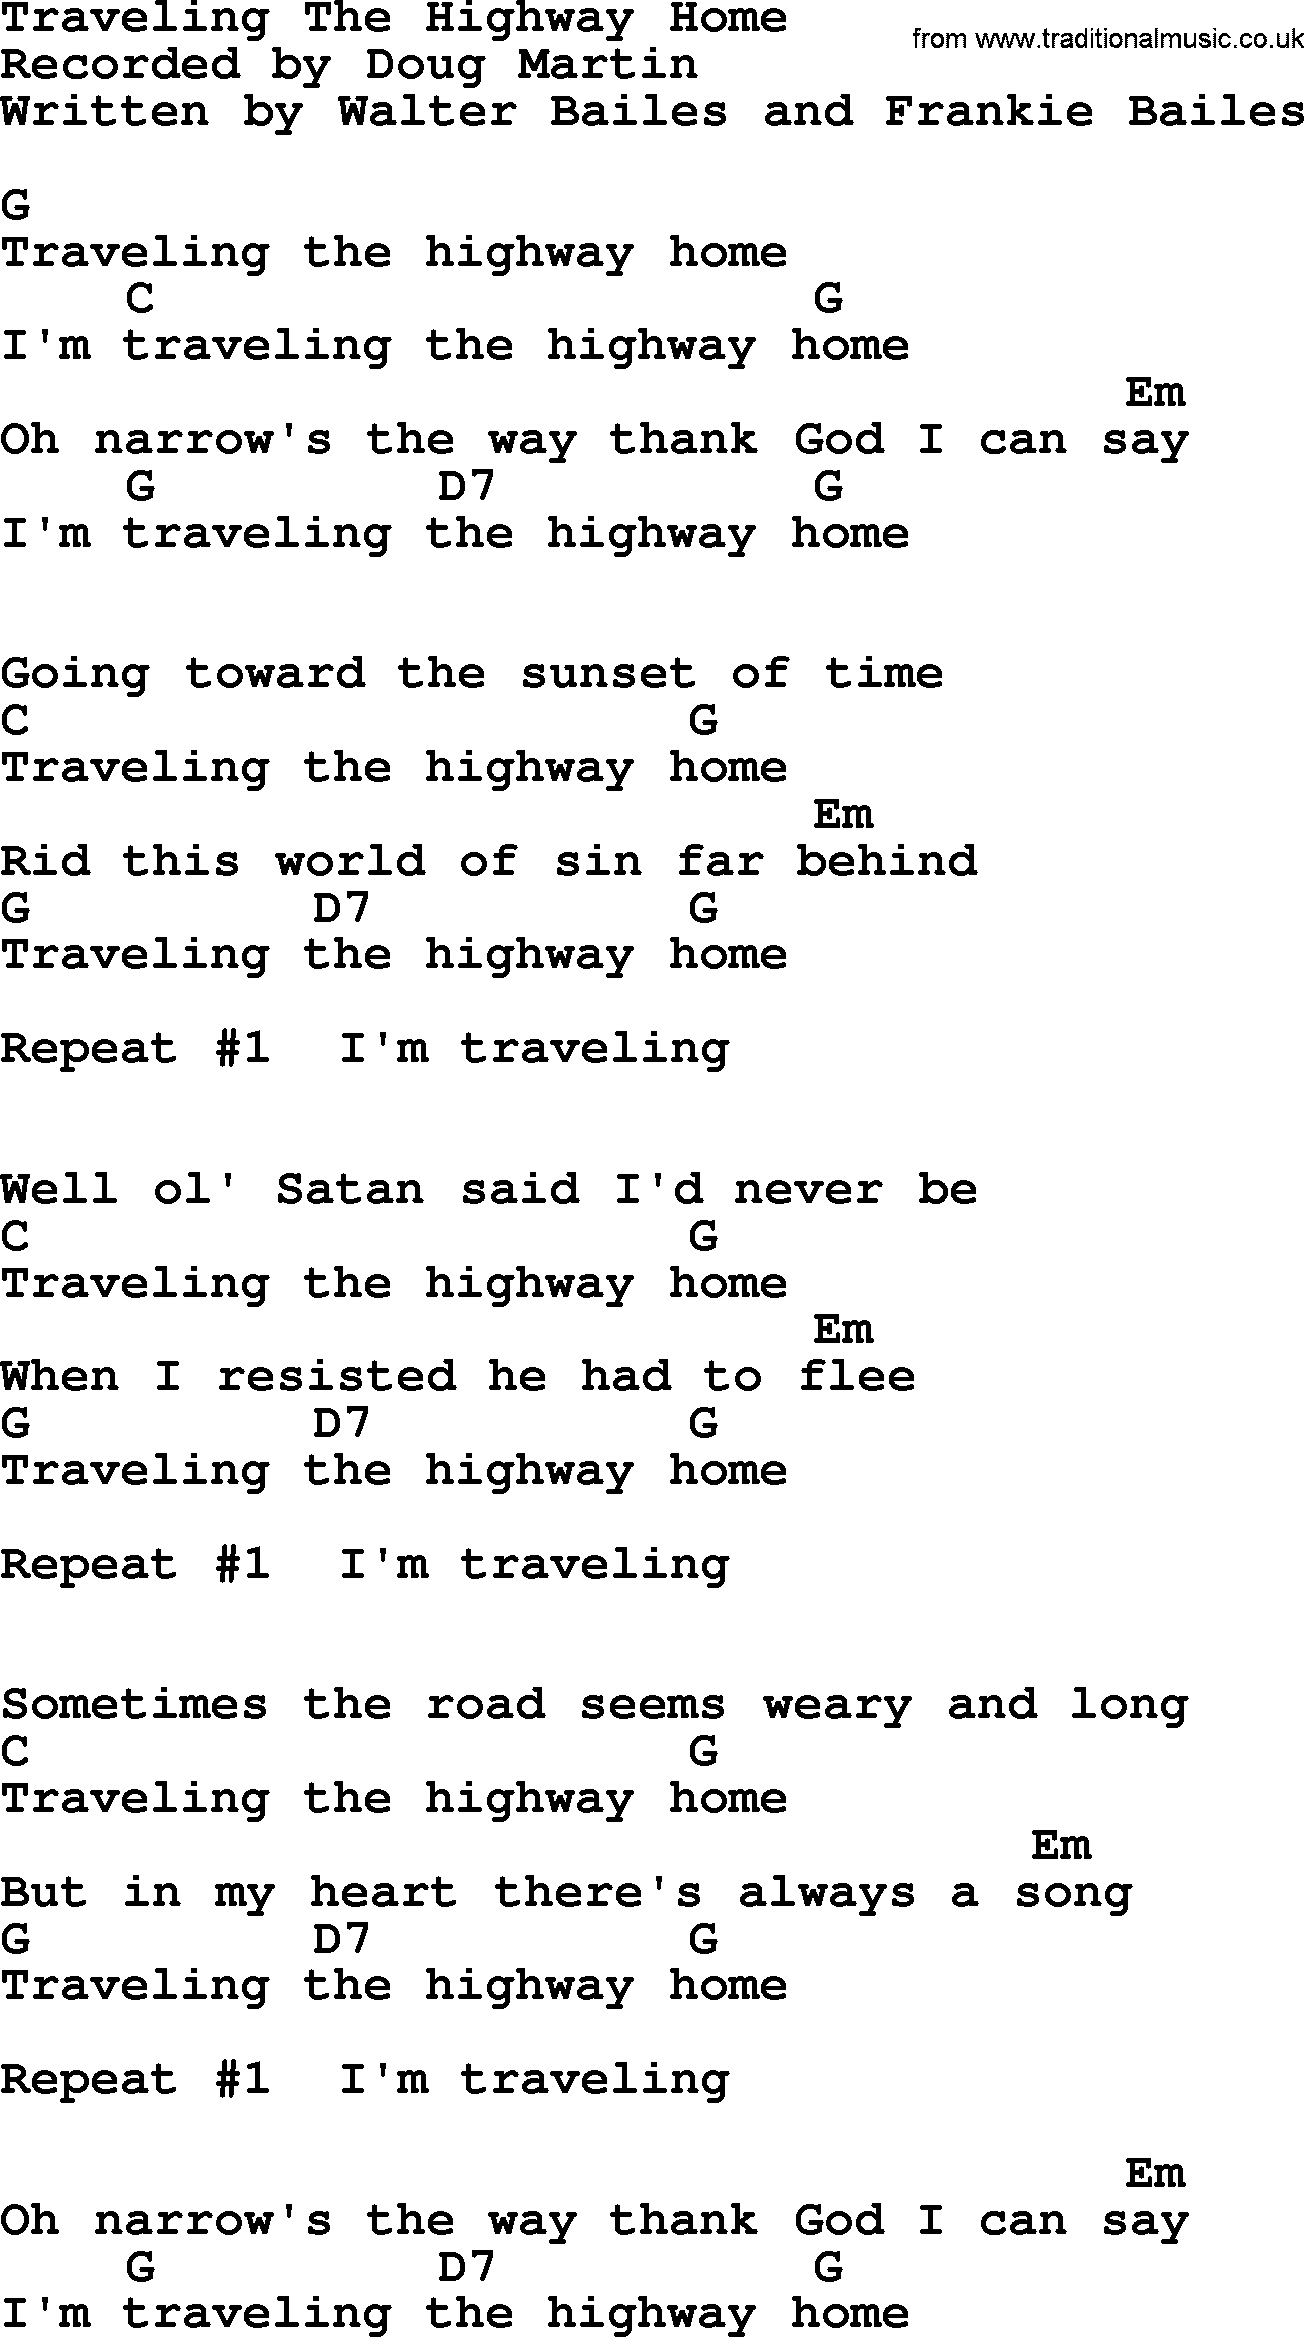 Bluegrass song: Traveling The Highway Home, lyrics and chords